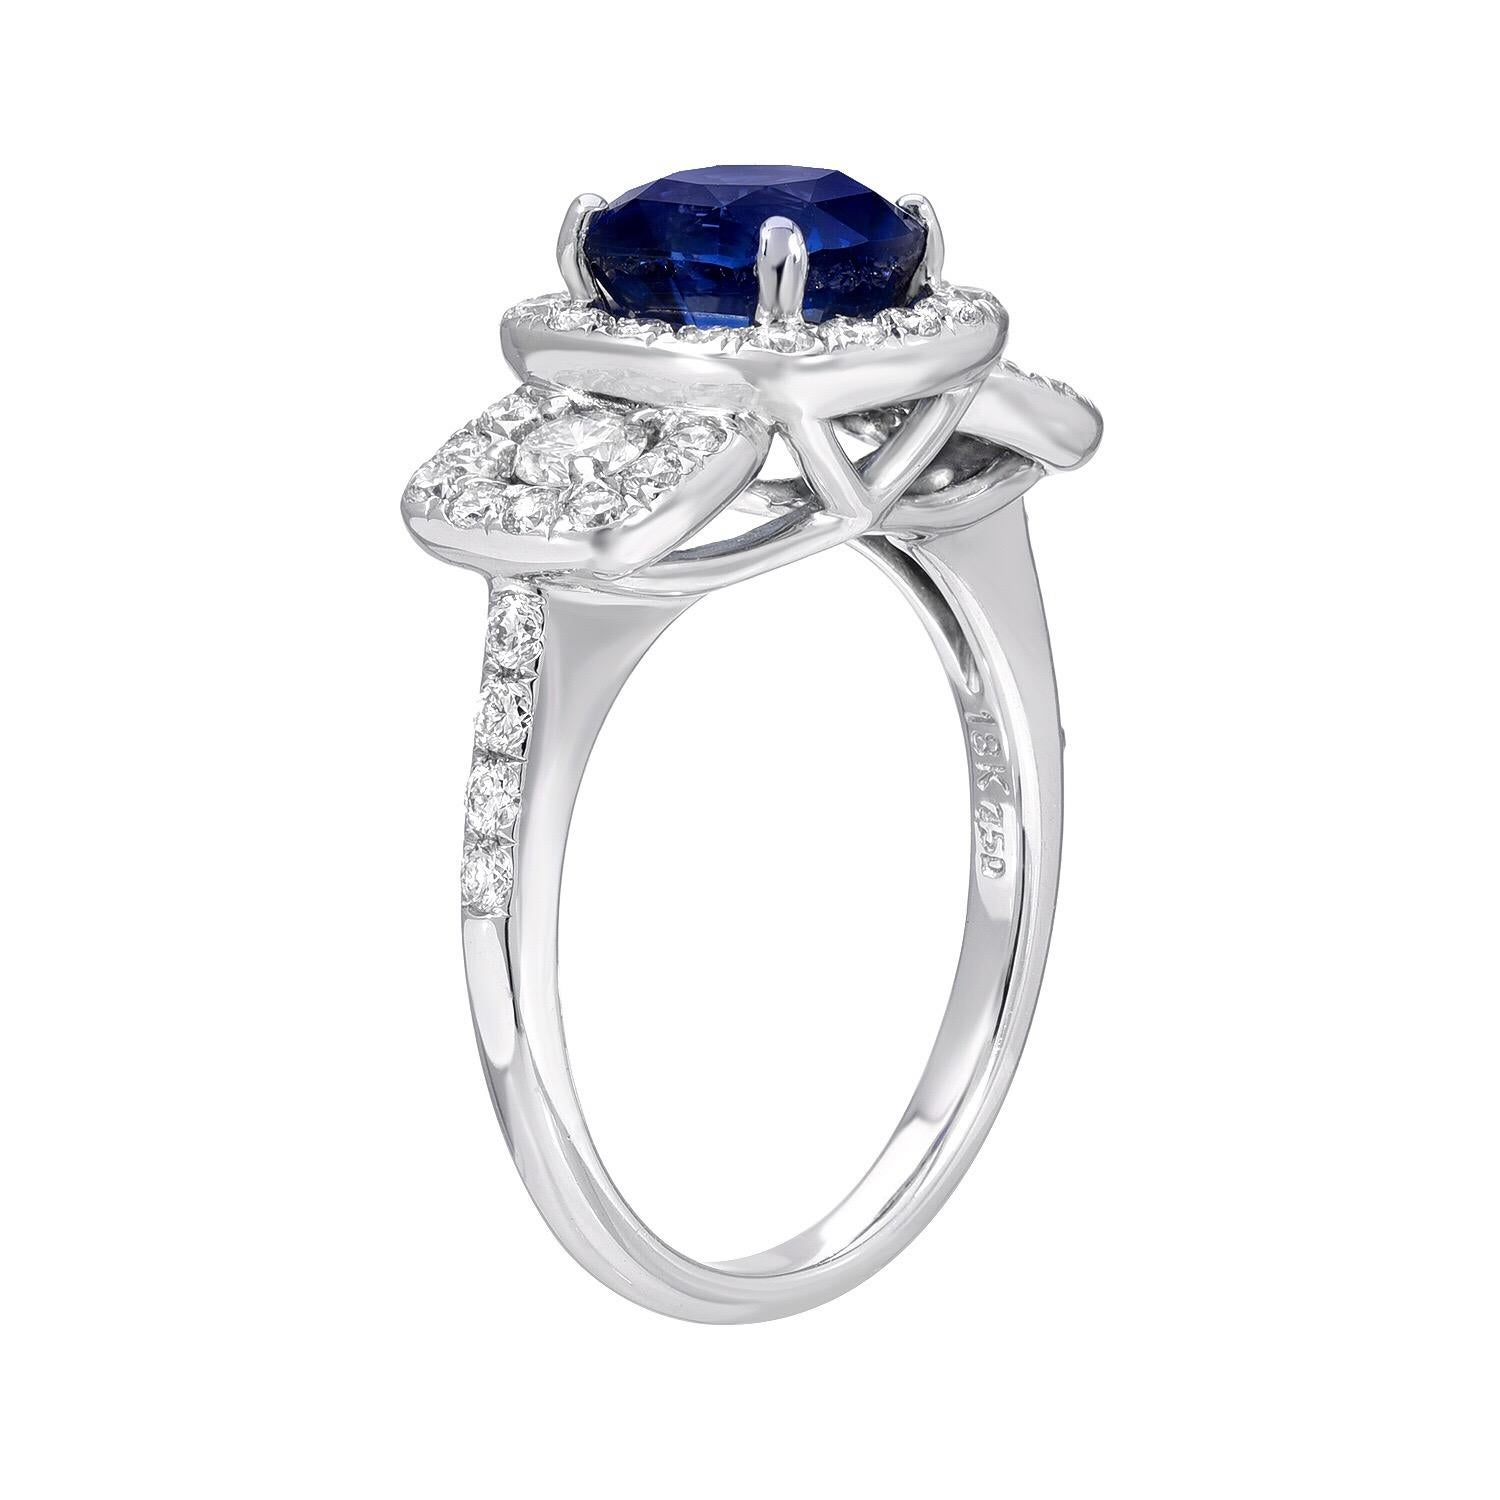 Sapphire ring featuring a Blue Sapphire cushion cut weighing a total of 2.35 carats, adorned by a total of 0.87 carat diamonds, in this gorgeous 18K white gold engagement ring or cocktail ring. 
Sapphire ring size 6.5. Re-sizing is complimentary